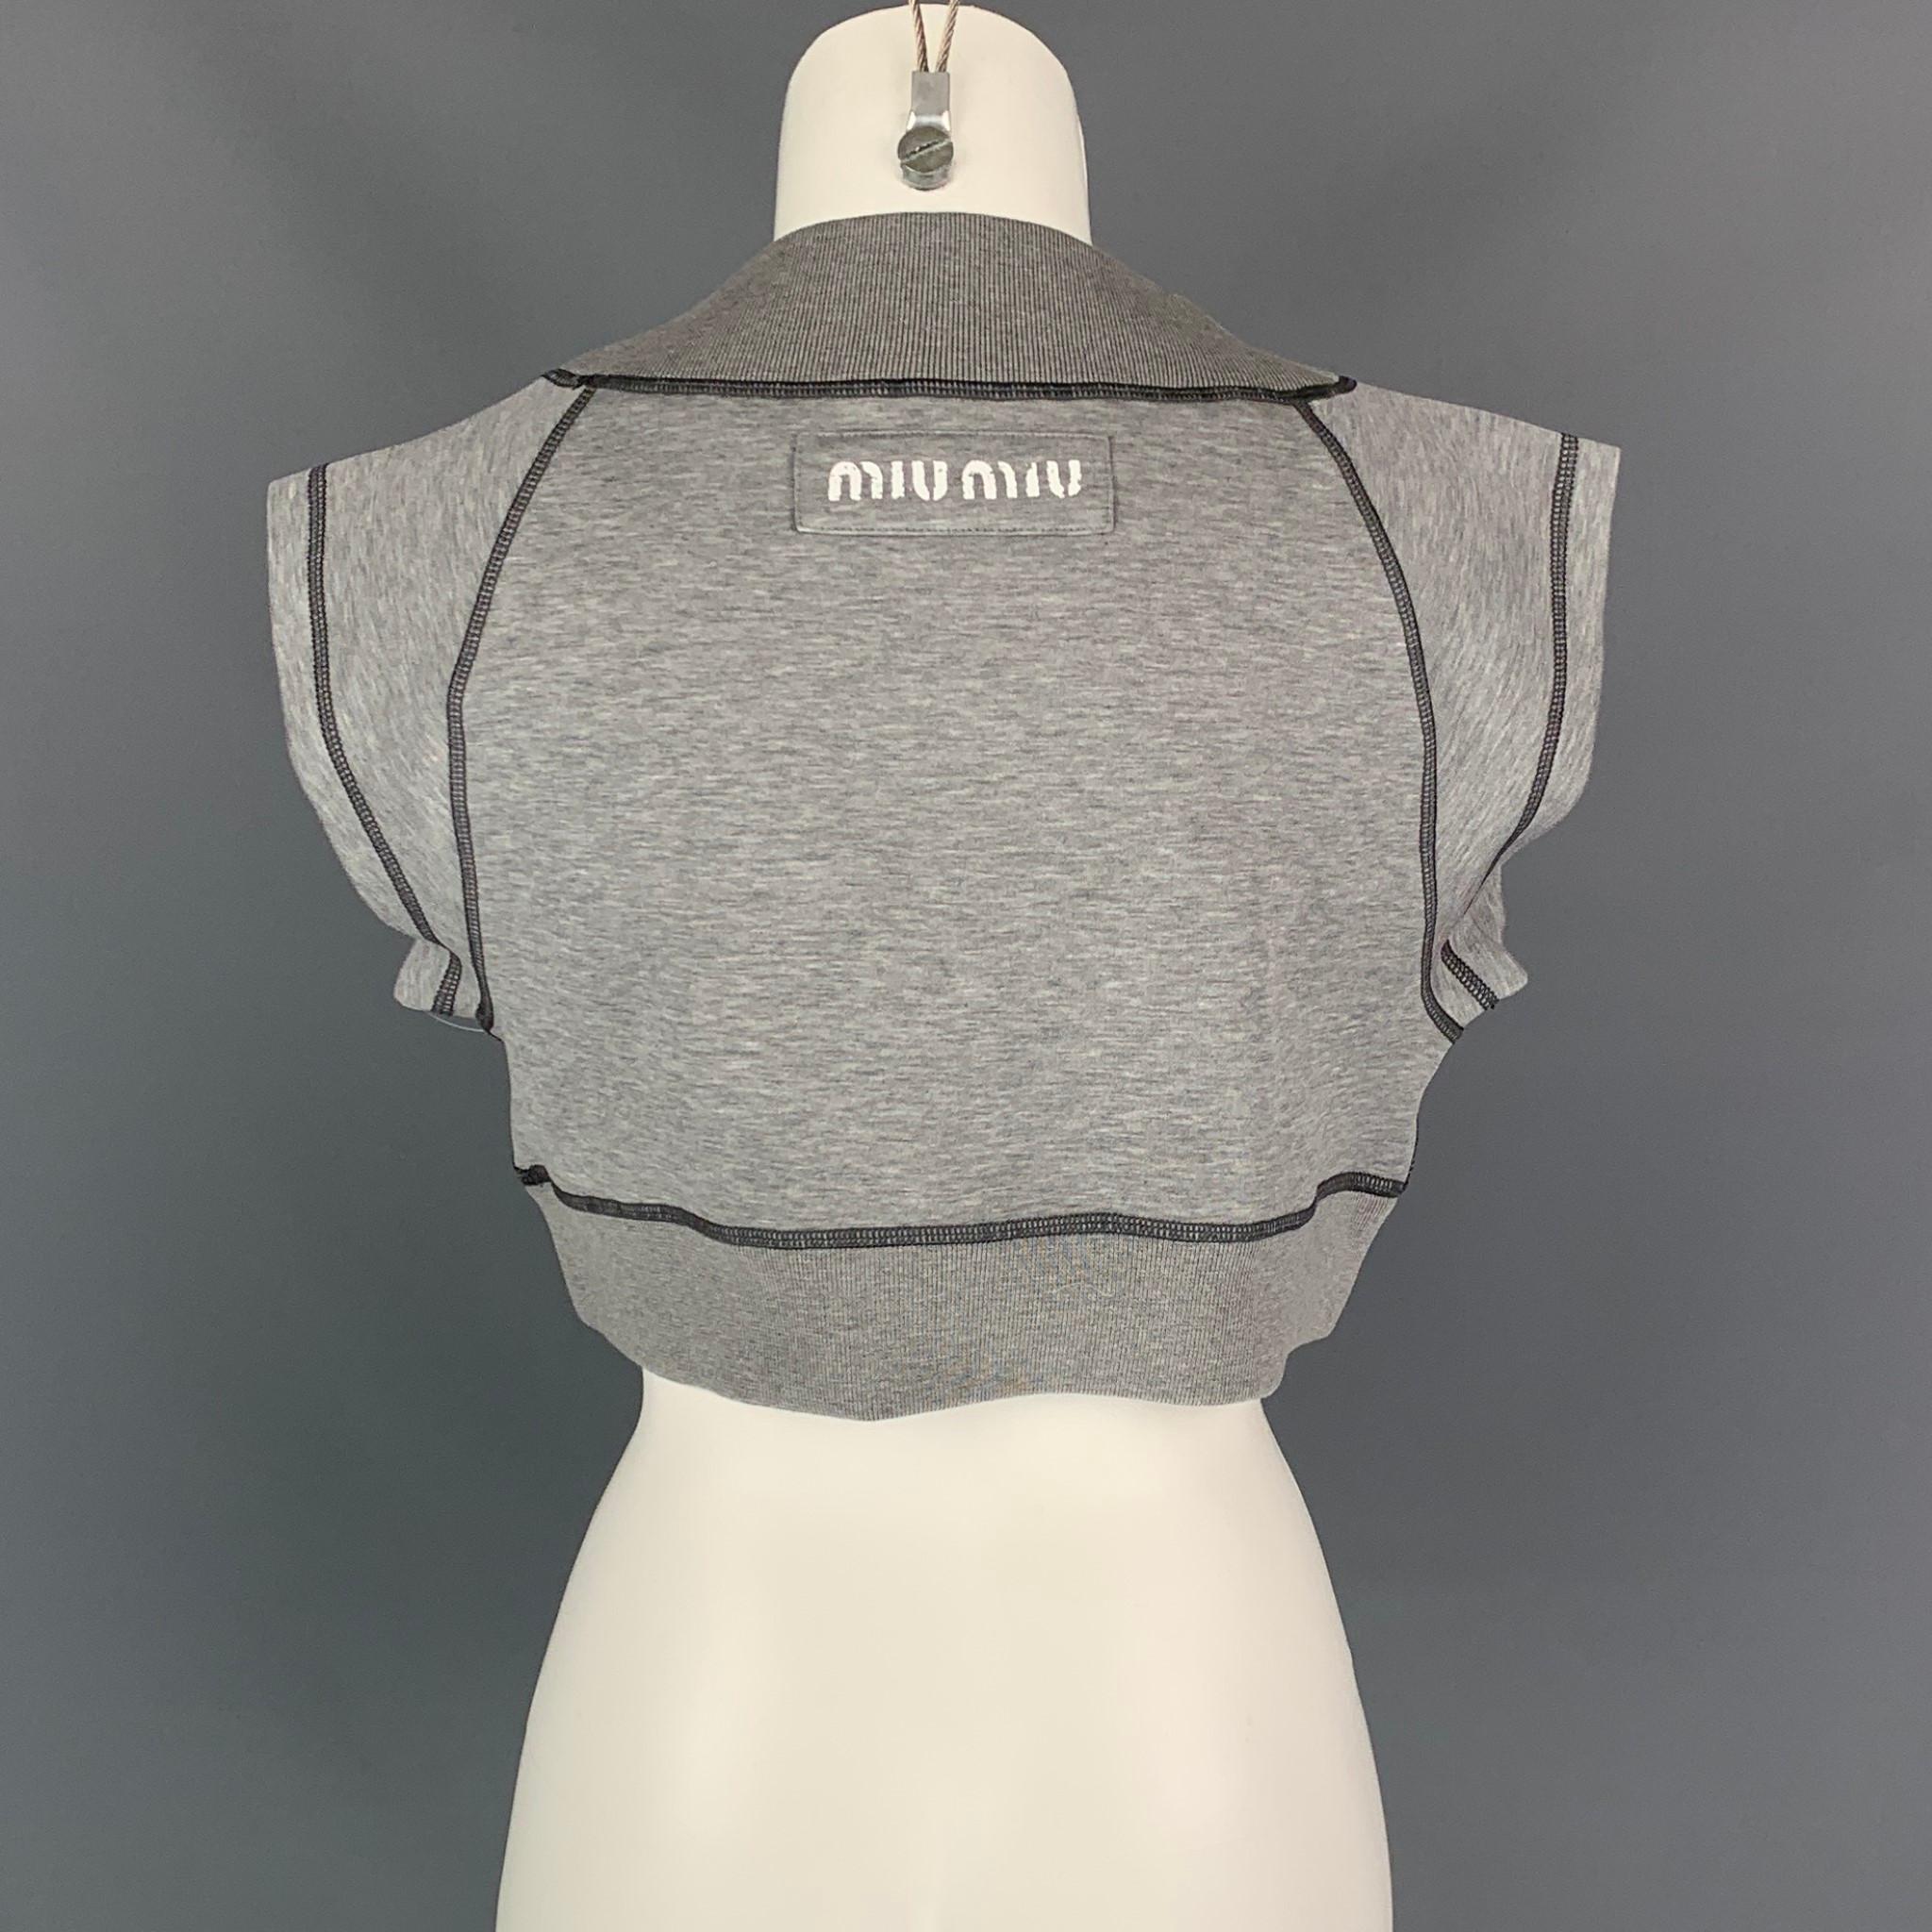 MIU MIU top comes in a gray ribbed cotton featuring a cropped fit, wide collar, logo patch, and contrast stitching. Made in Italy.

Excellent Pre-Owned Condition.
Marked: XS
Original Retail Price: $1,240.00

Measurements:

Shoulder: 18 in.
Bust: 38